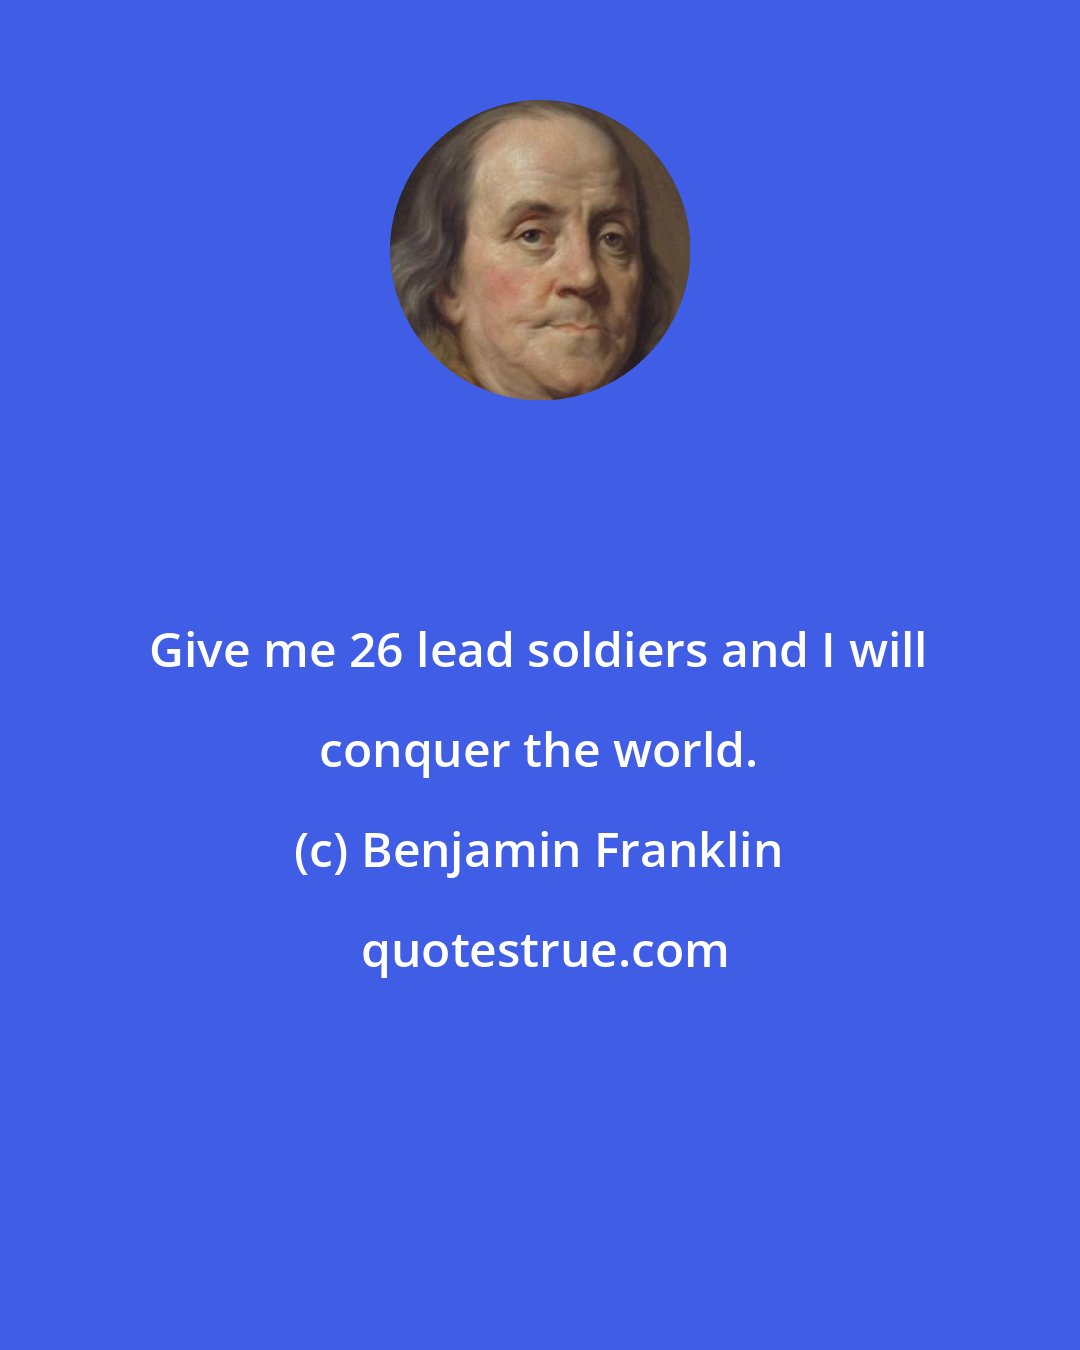 Benjamin Franklin: Give me 26 lead soldiers and I will conquer the world.